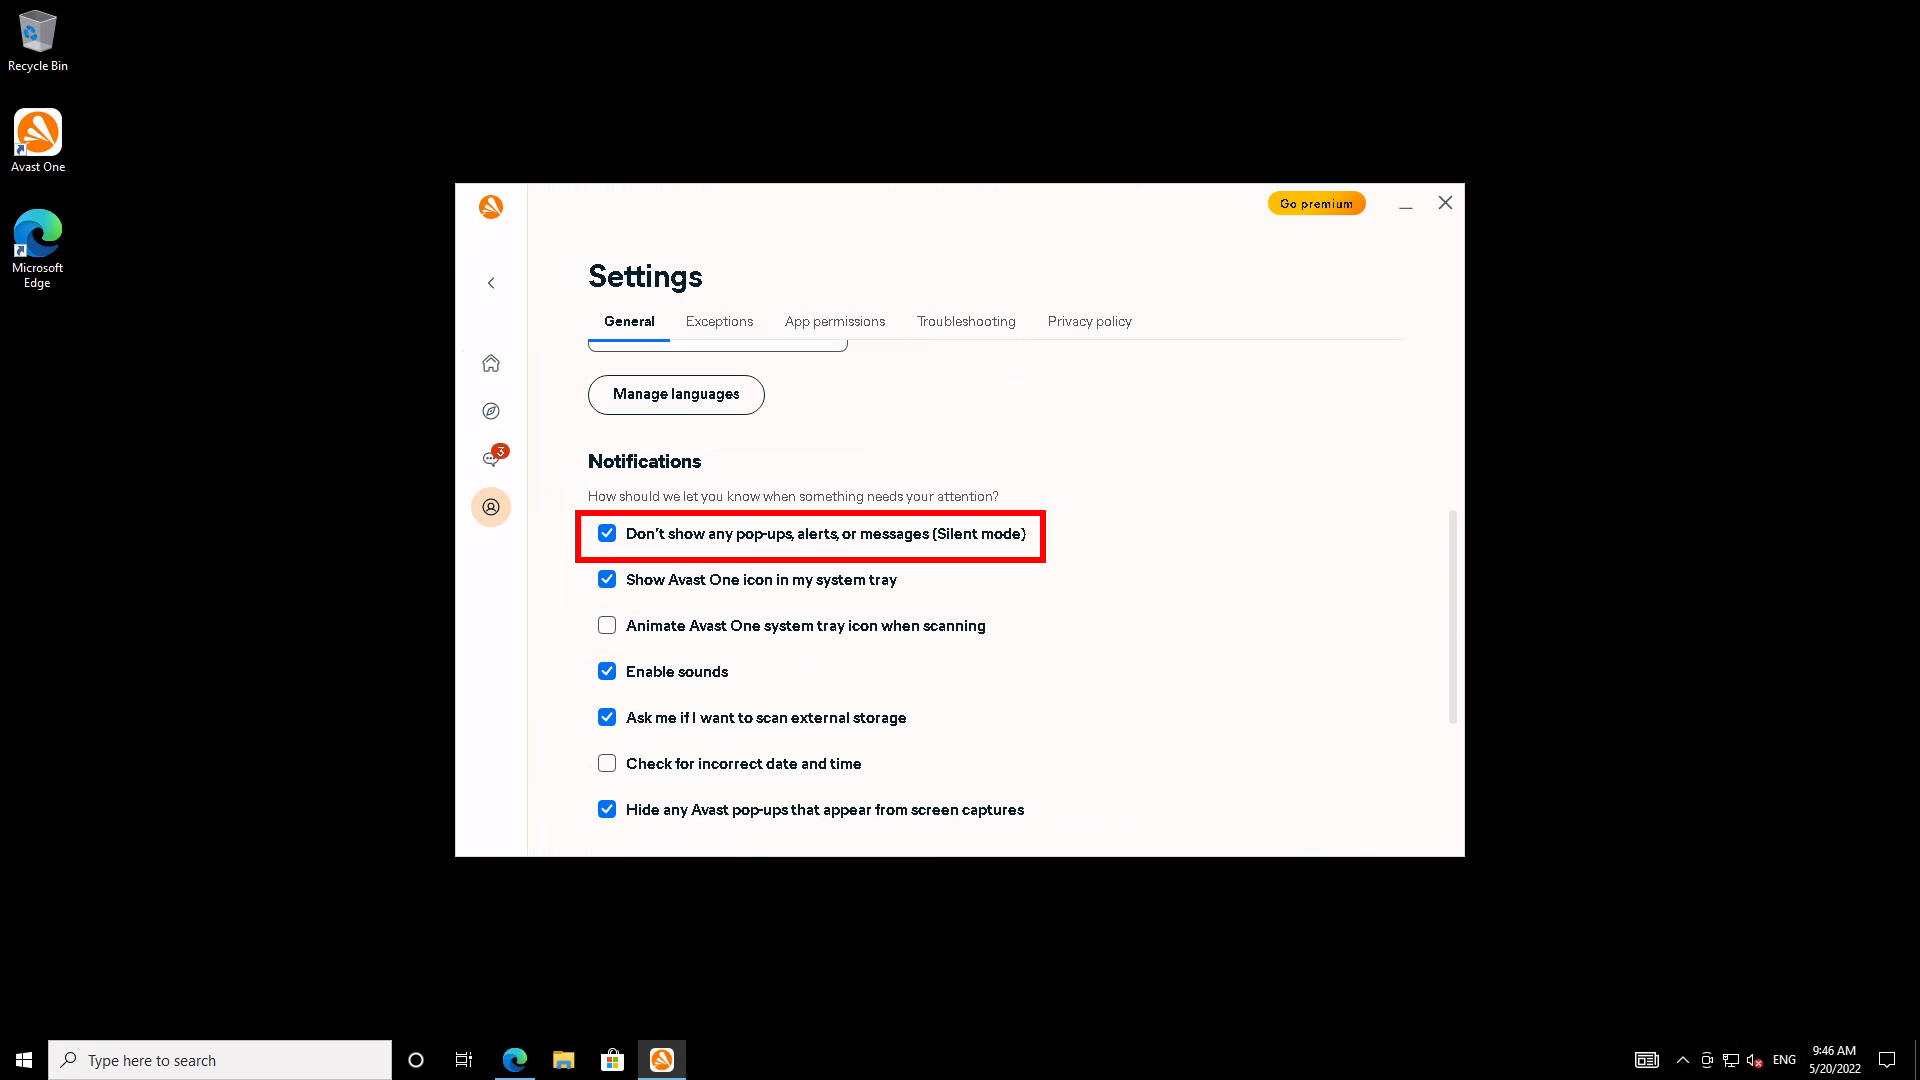 Avast one notification settings - silent mode is highlighted